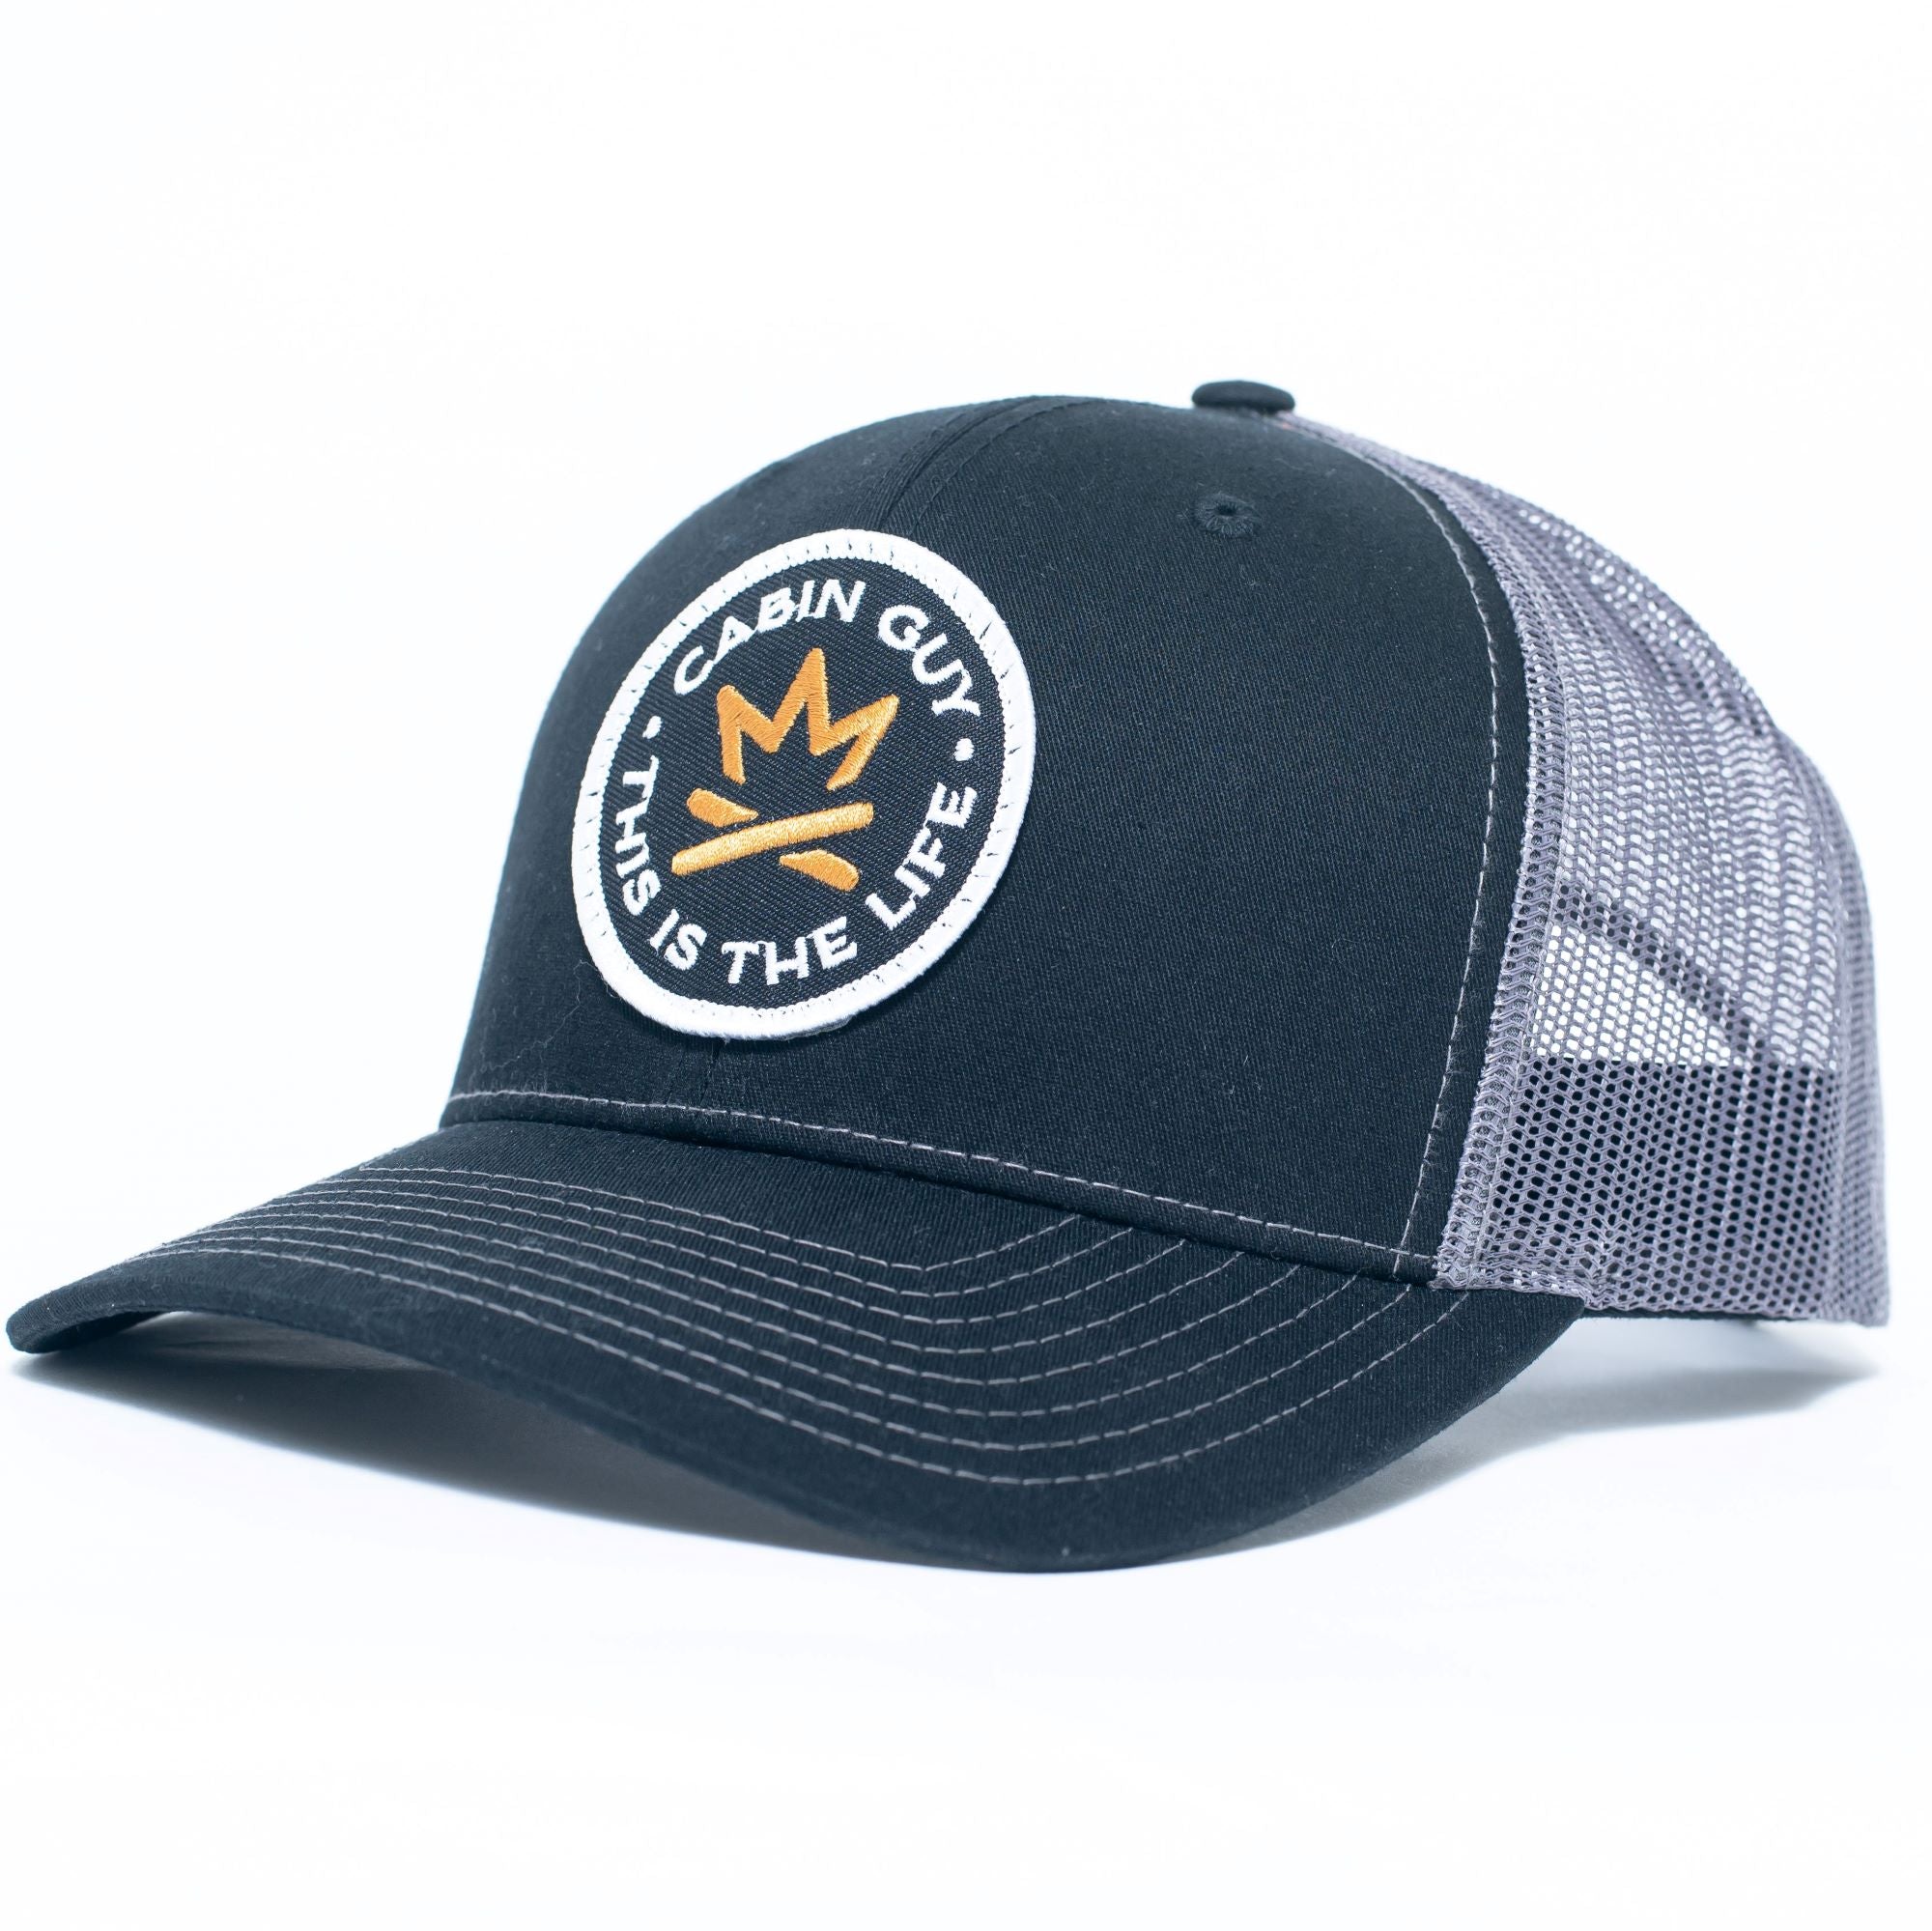 Woven patch snapback trucker hat for cabin owners